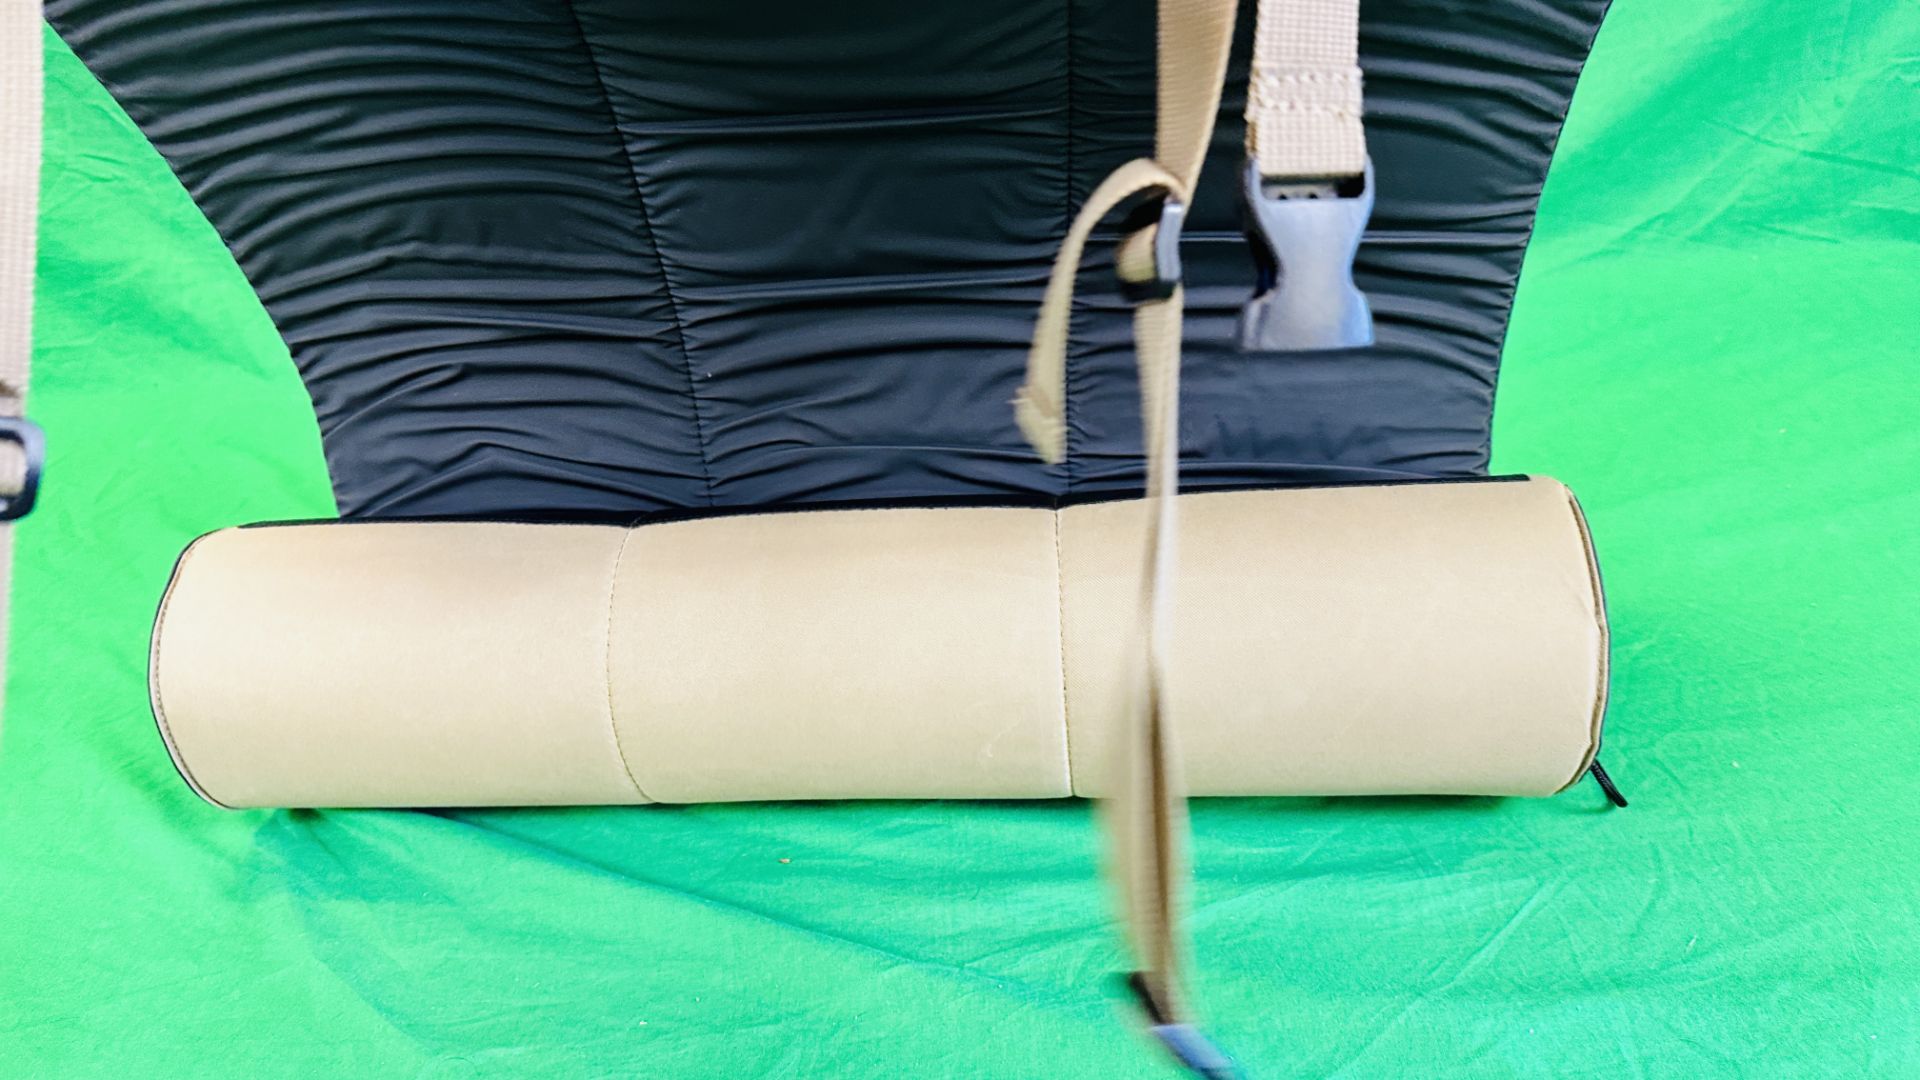 A BLACK CANVAS SHOOTING CUSHION ALONG WITH A GREEN ROLL OUT SHOOTING MAT. - Image 9 of 10